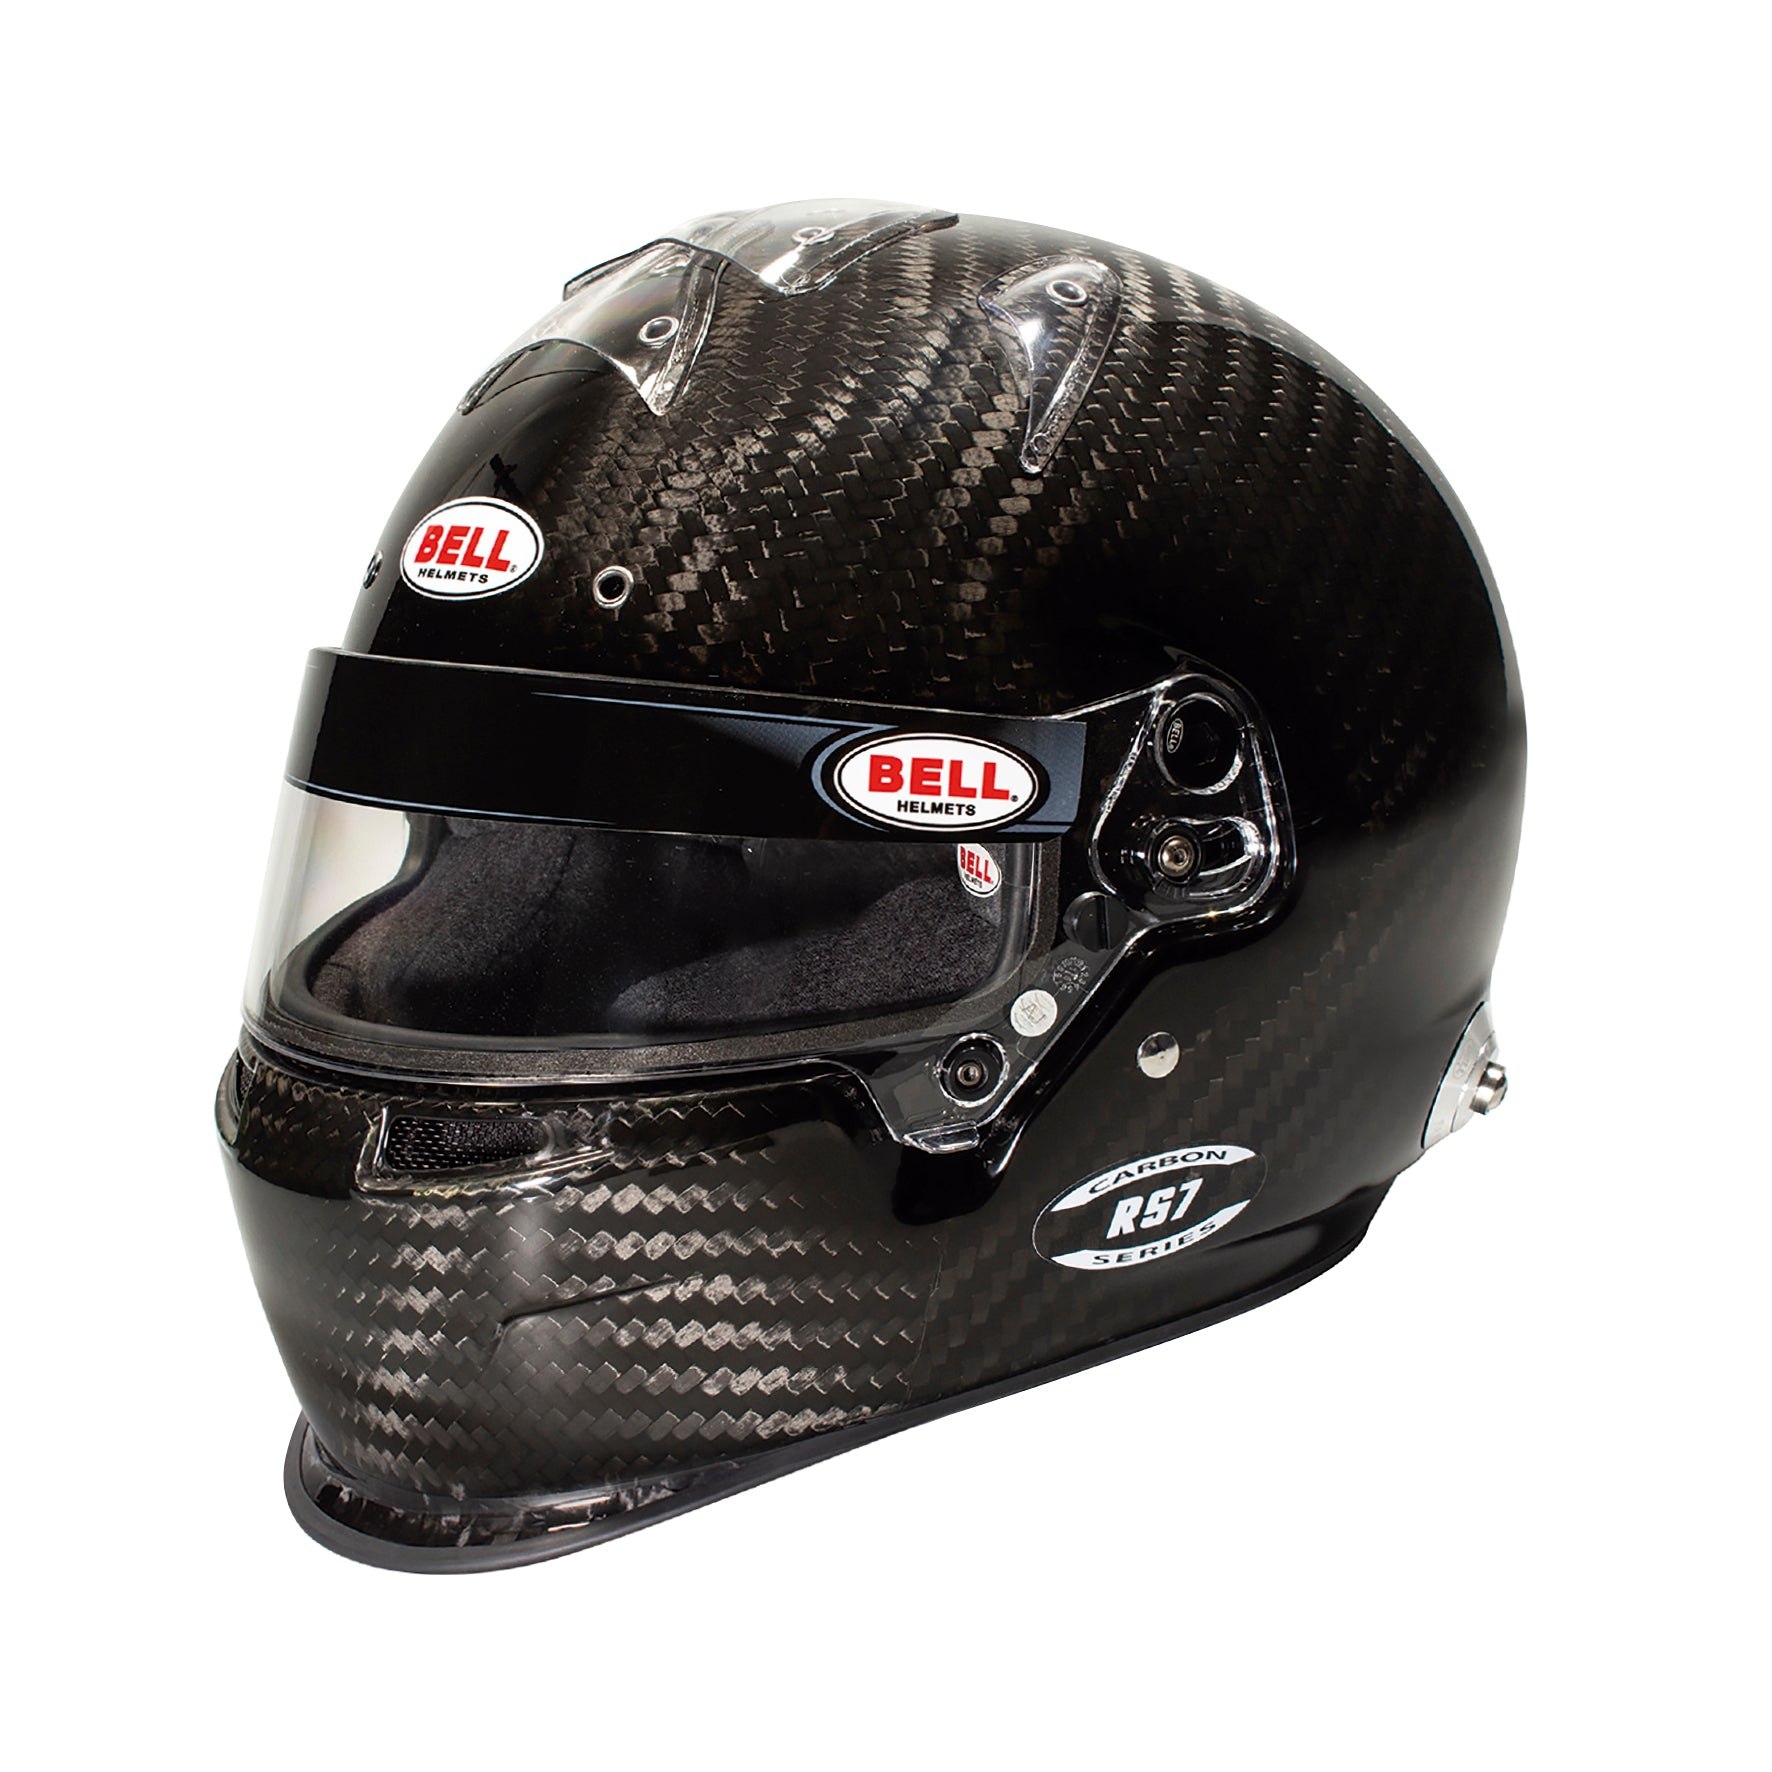 BELL 1204A08 Шолом full face RS7 CARBON DUCKBILL, HANS, FIA, size 59 (7 3/8) Photo-1 